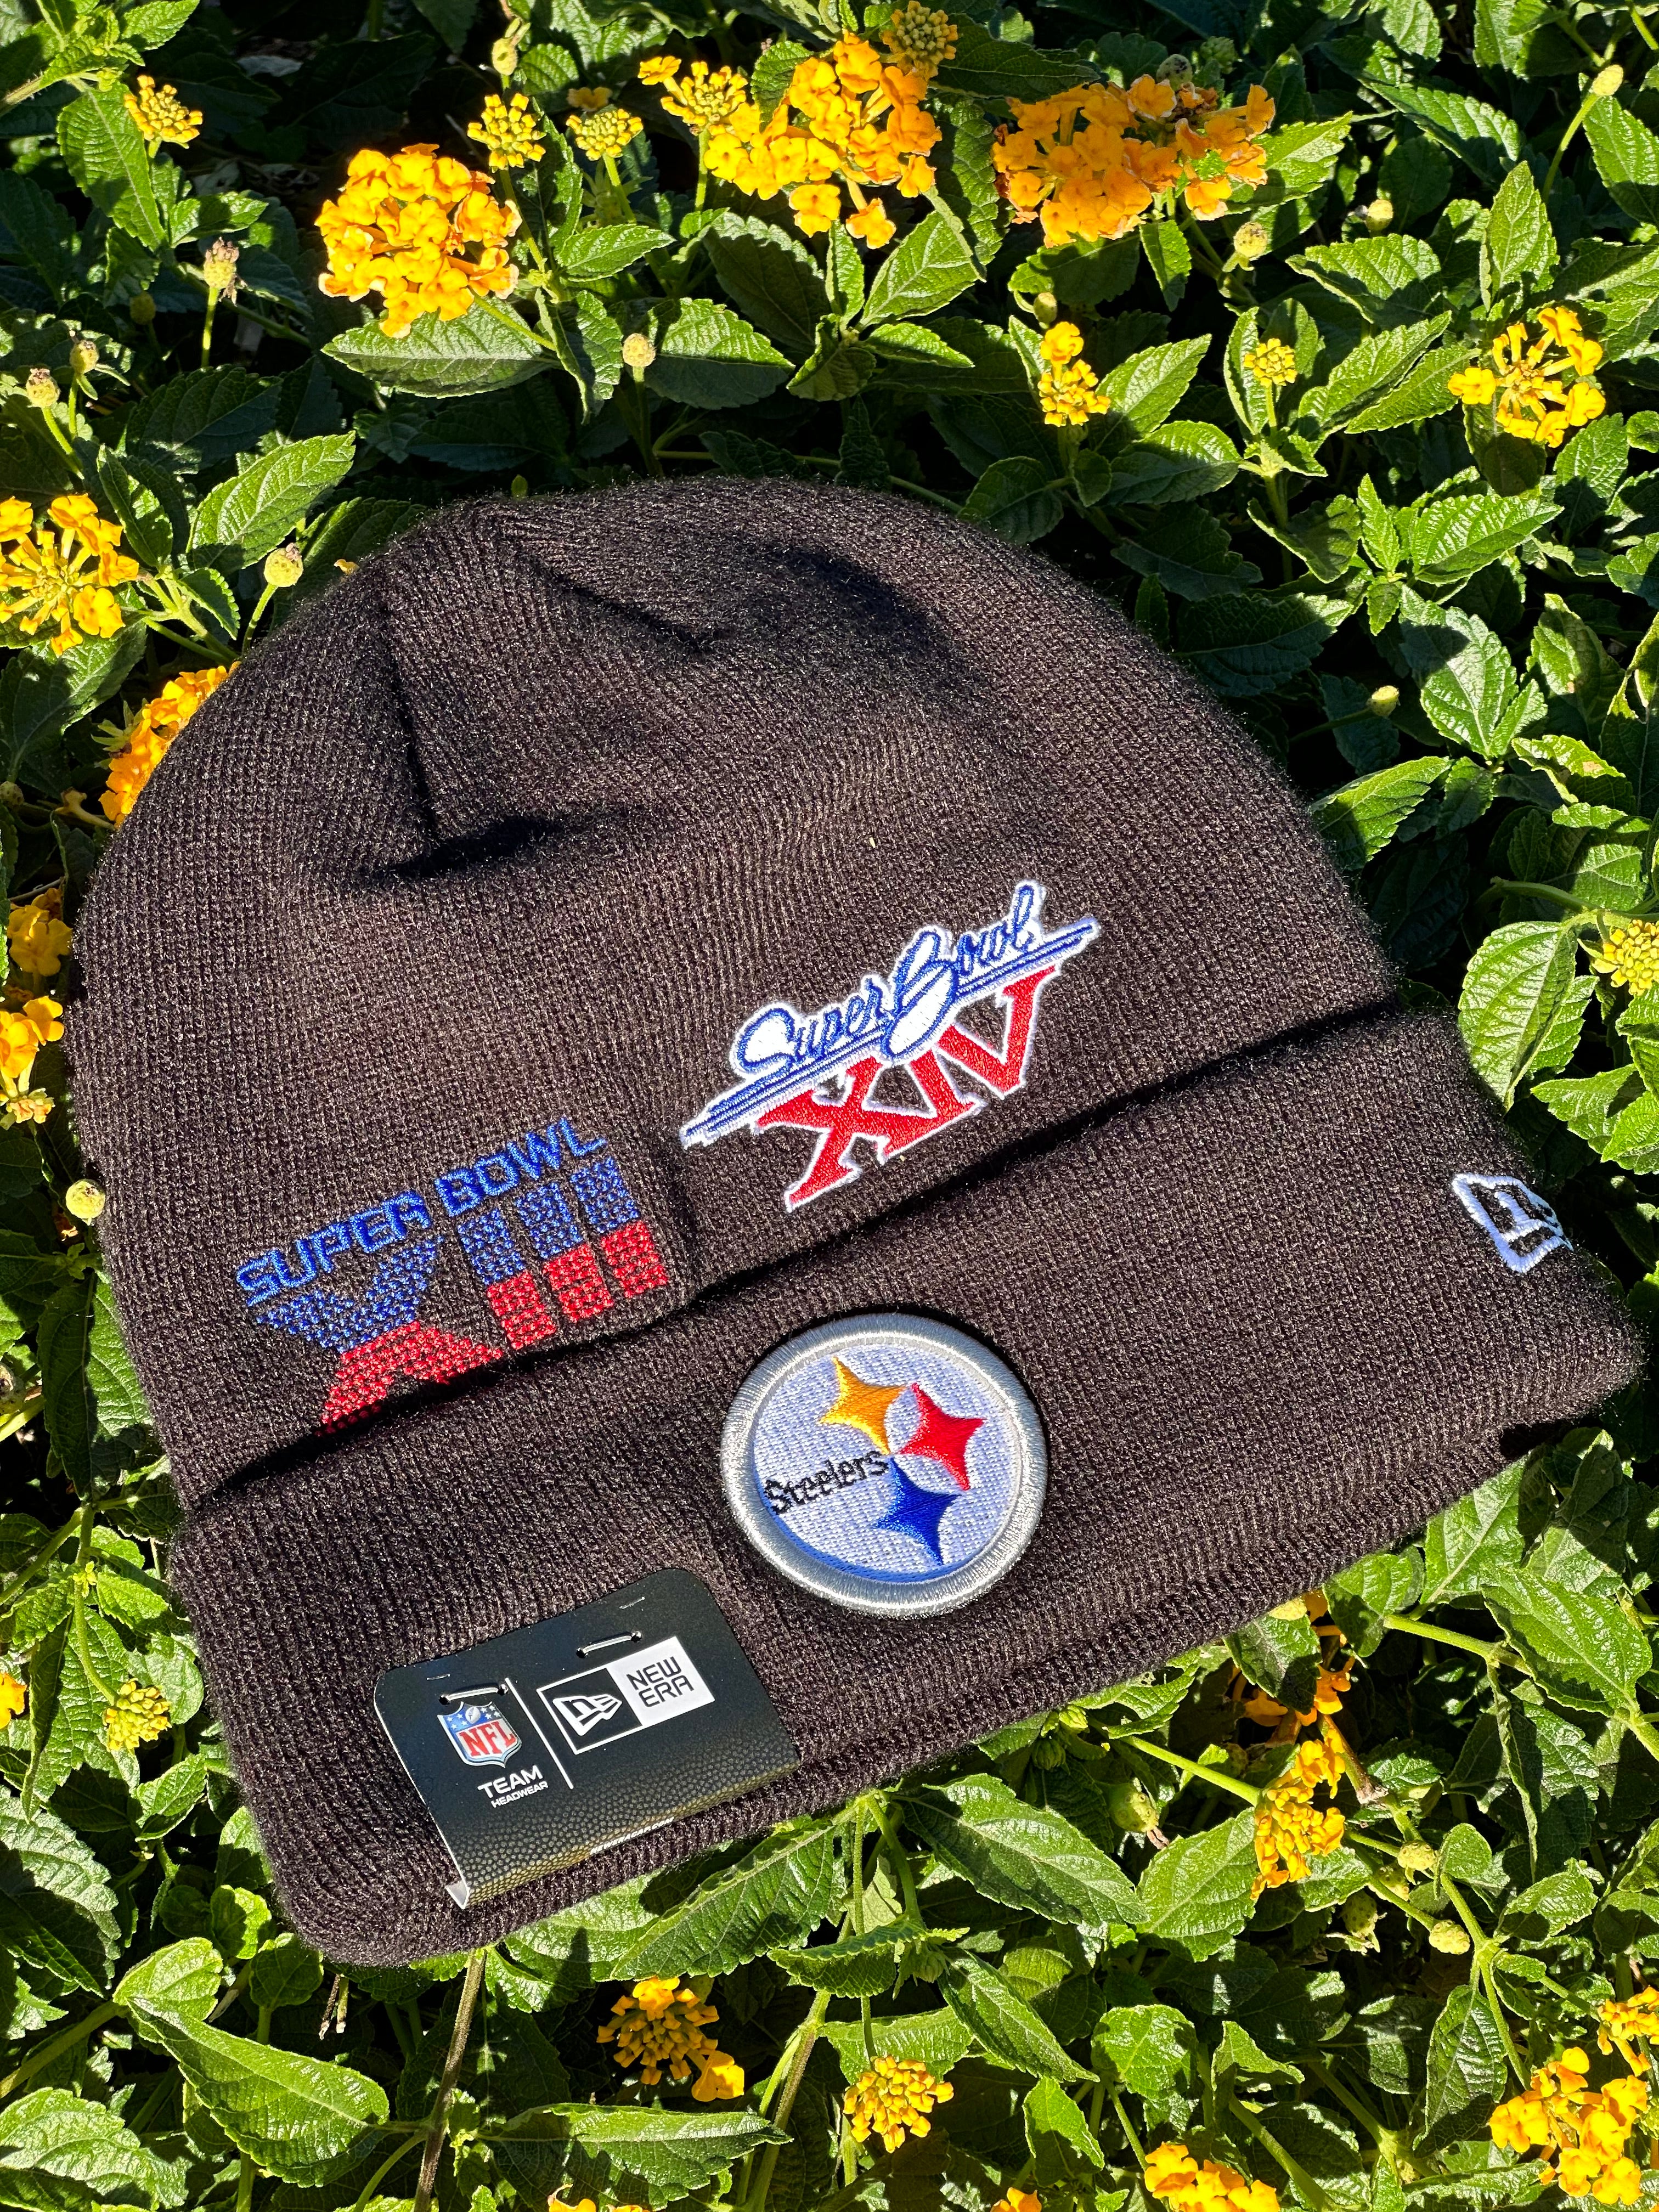 NEW ERA EXCLUSIVE BLACK PRO-KNIT PITTSBURGH STEELERS BEANIE W/ SUPERBOWL PATCHES